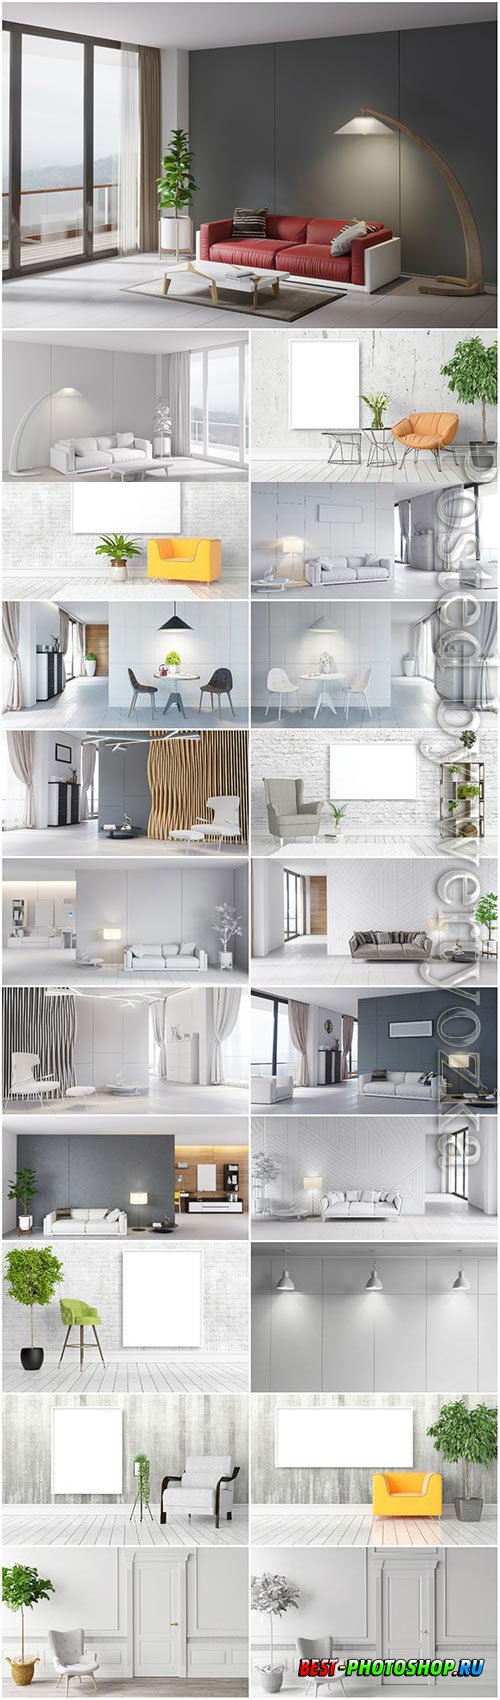 Modern interior in light colors stock photo